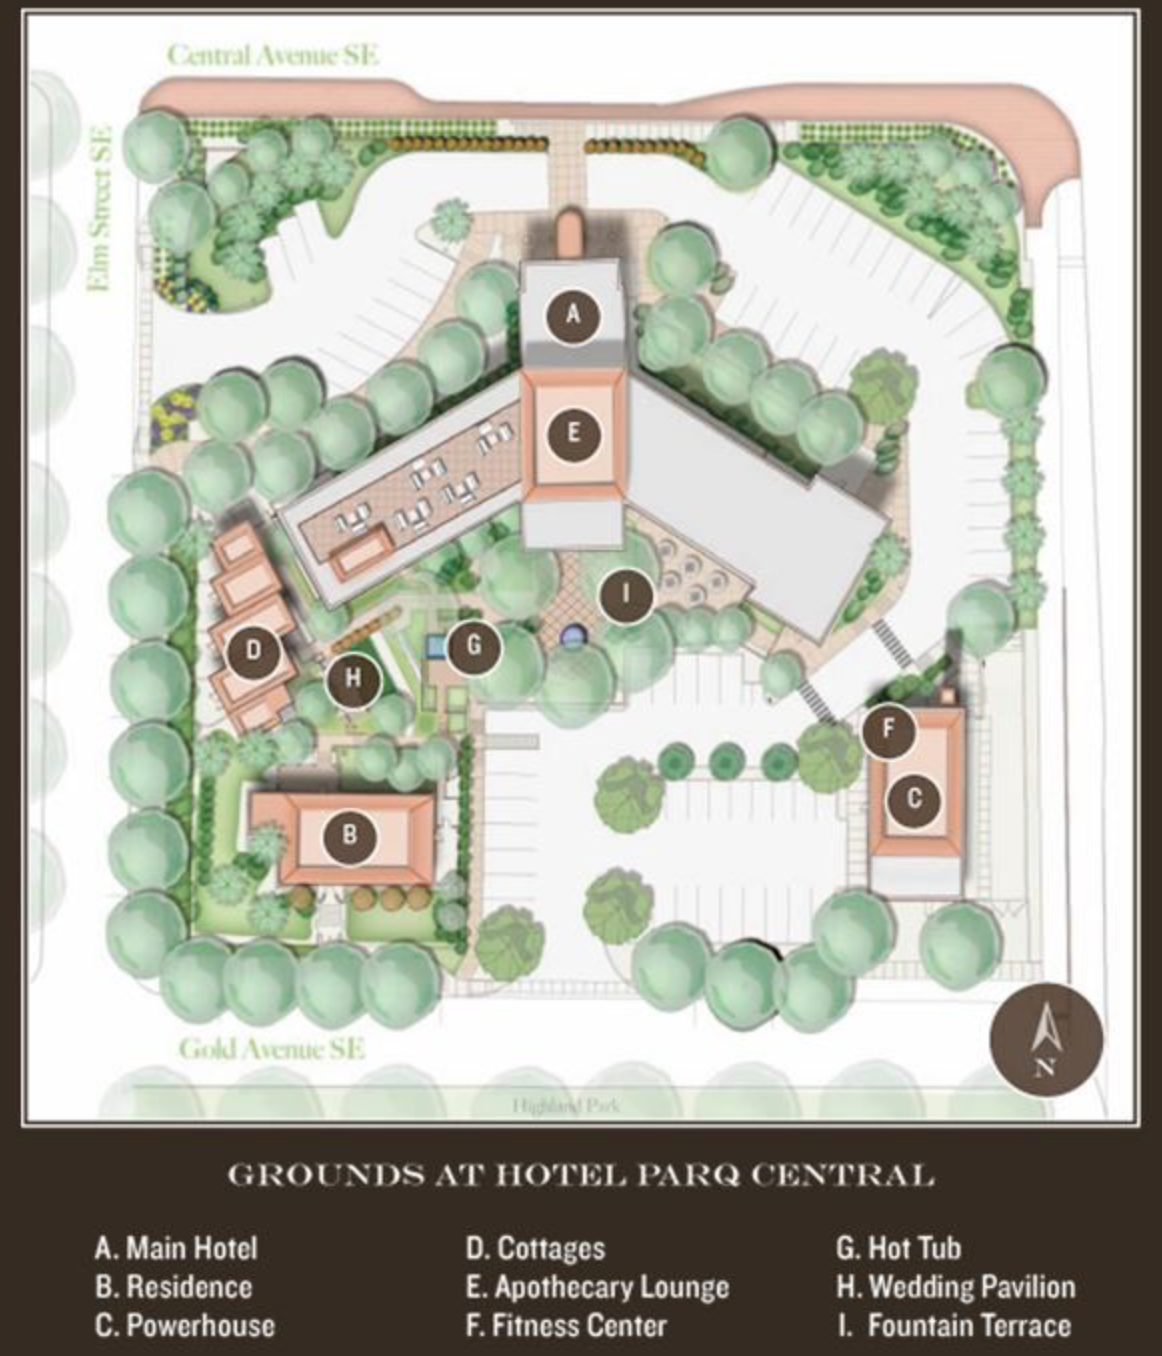 Layout of Parq Central Hotel buildings.